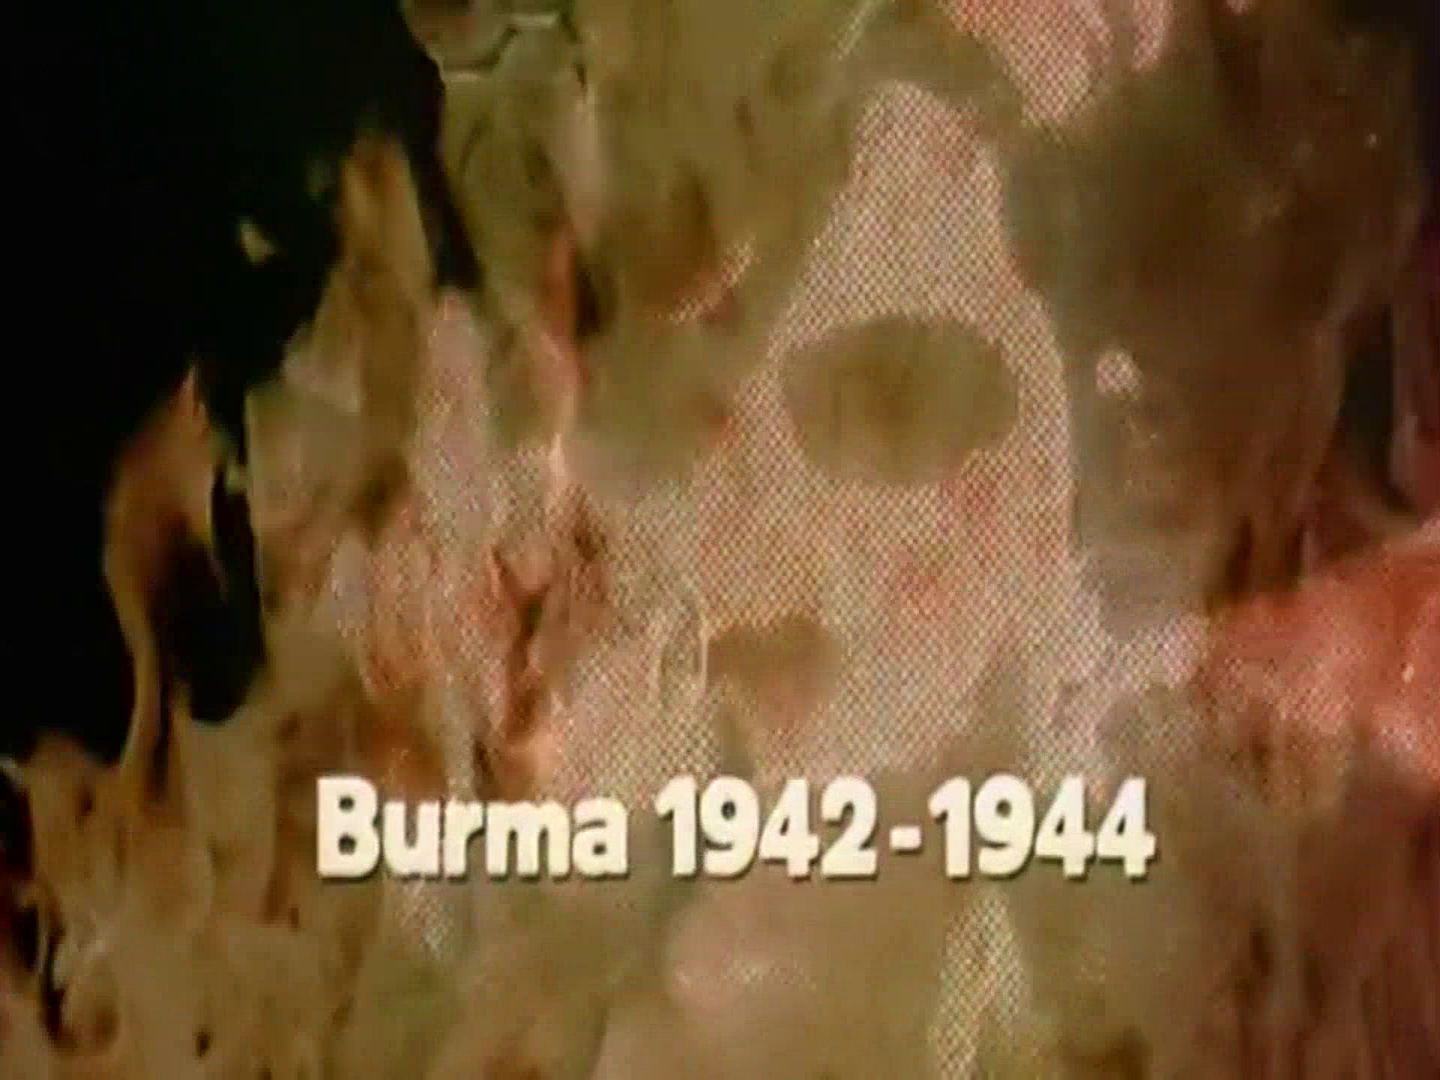 Main title from the 1974 ‘It’s a Lovely Day Tomorrow’ episode of The World at War (1973-74) (2). Burma 1942-1944